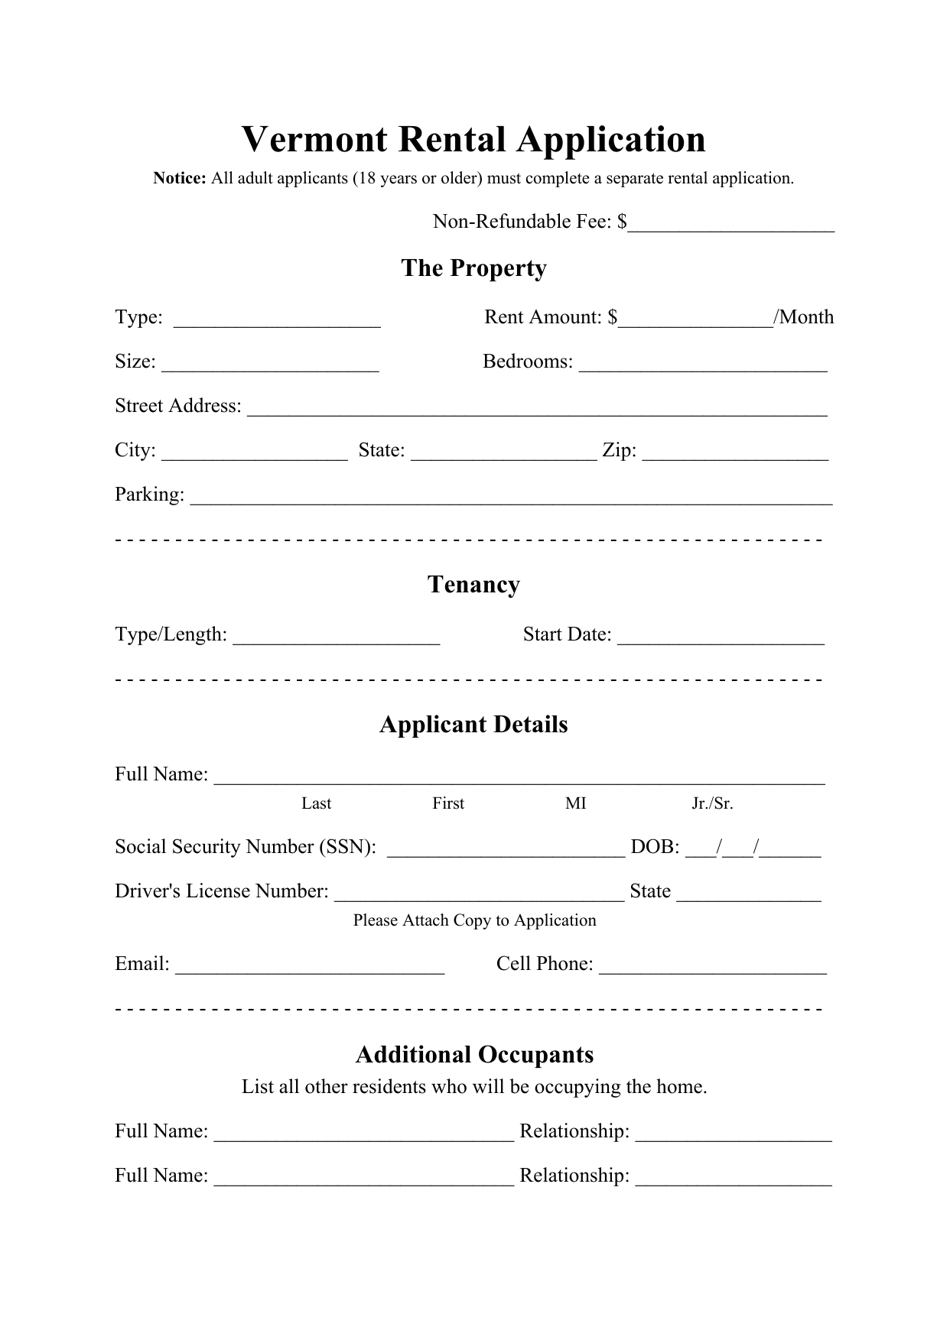 Rental Application Form - Vermont, Page 1